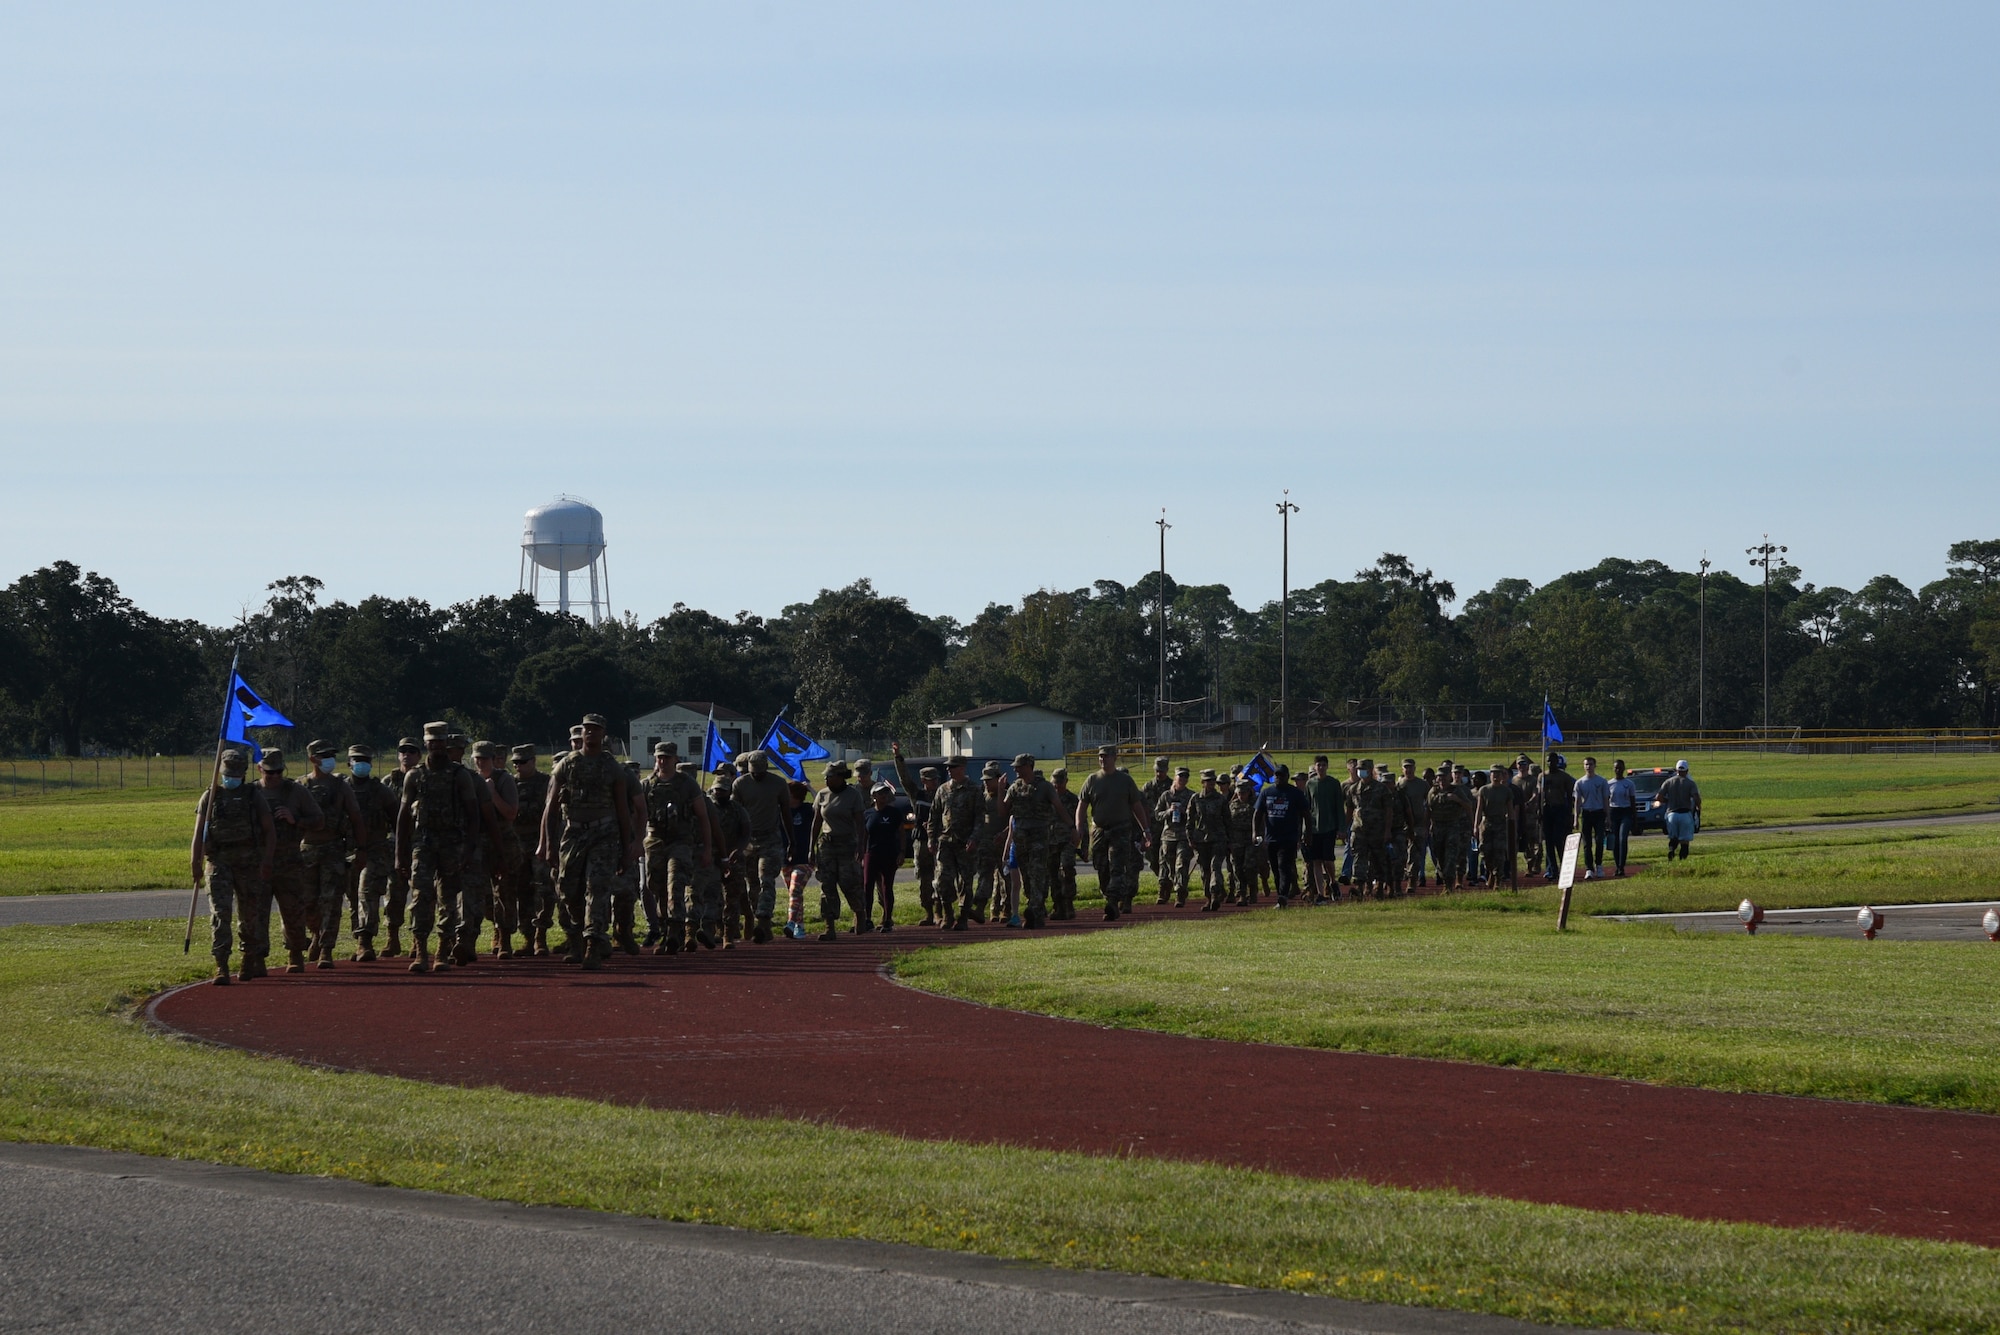 The 403rd Wing hosted a 20th Anniversary 9/11 Memorial Ruck March in rembrance of those who lost their lives during the events of 9/11. The march was led by the 403rd Security Forces Squadron and was open to all members of Keesler Air Force Base, both military and civilian. (U.S. Air Force photo by Master Sgt. Jessica Kendziorek)